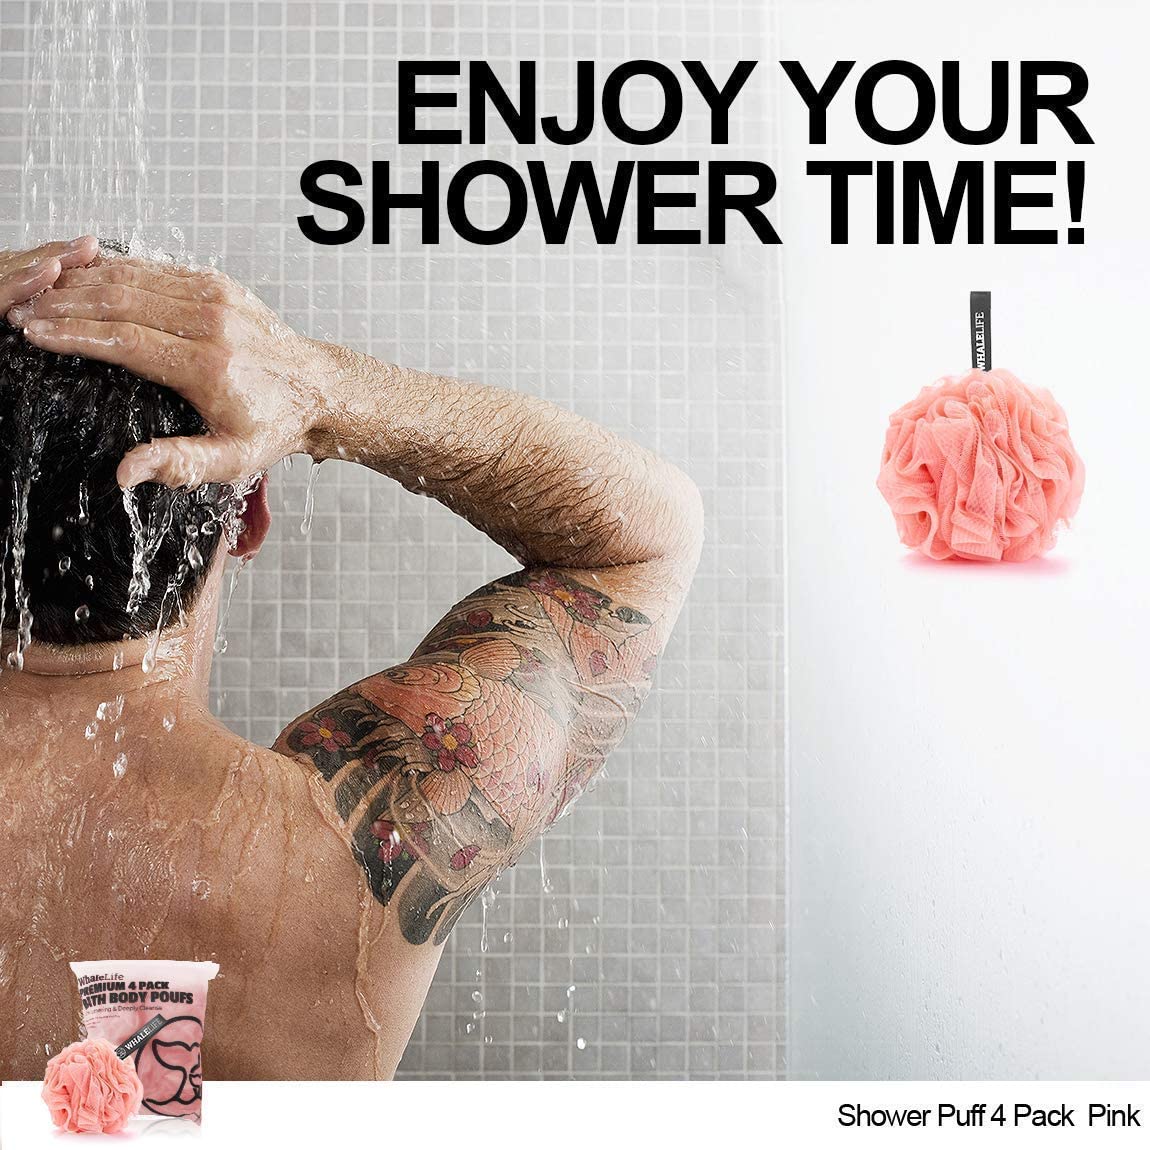 Black and Pink Bath Loofah Sponge Shower Pouf Mesh Puff Shower Ball for Men and Women